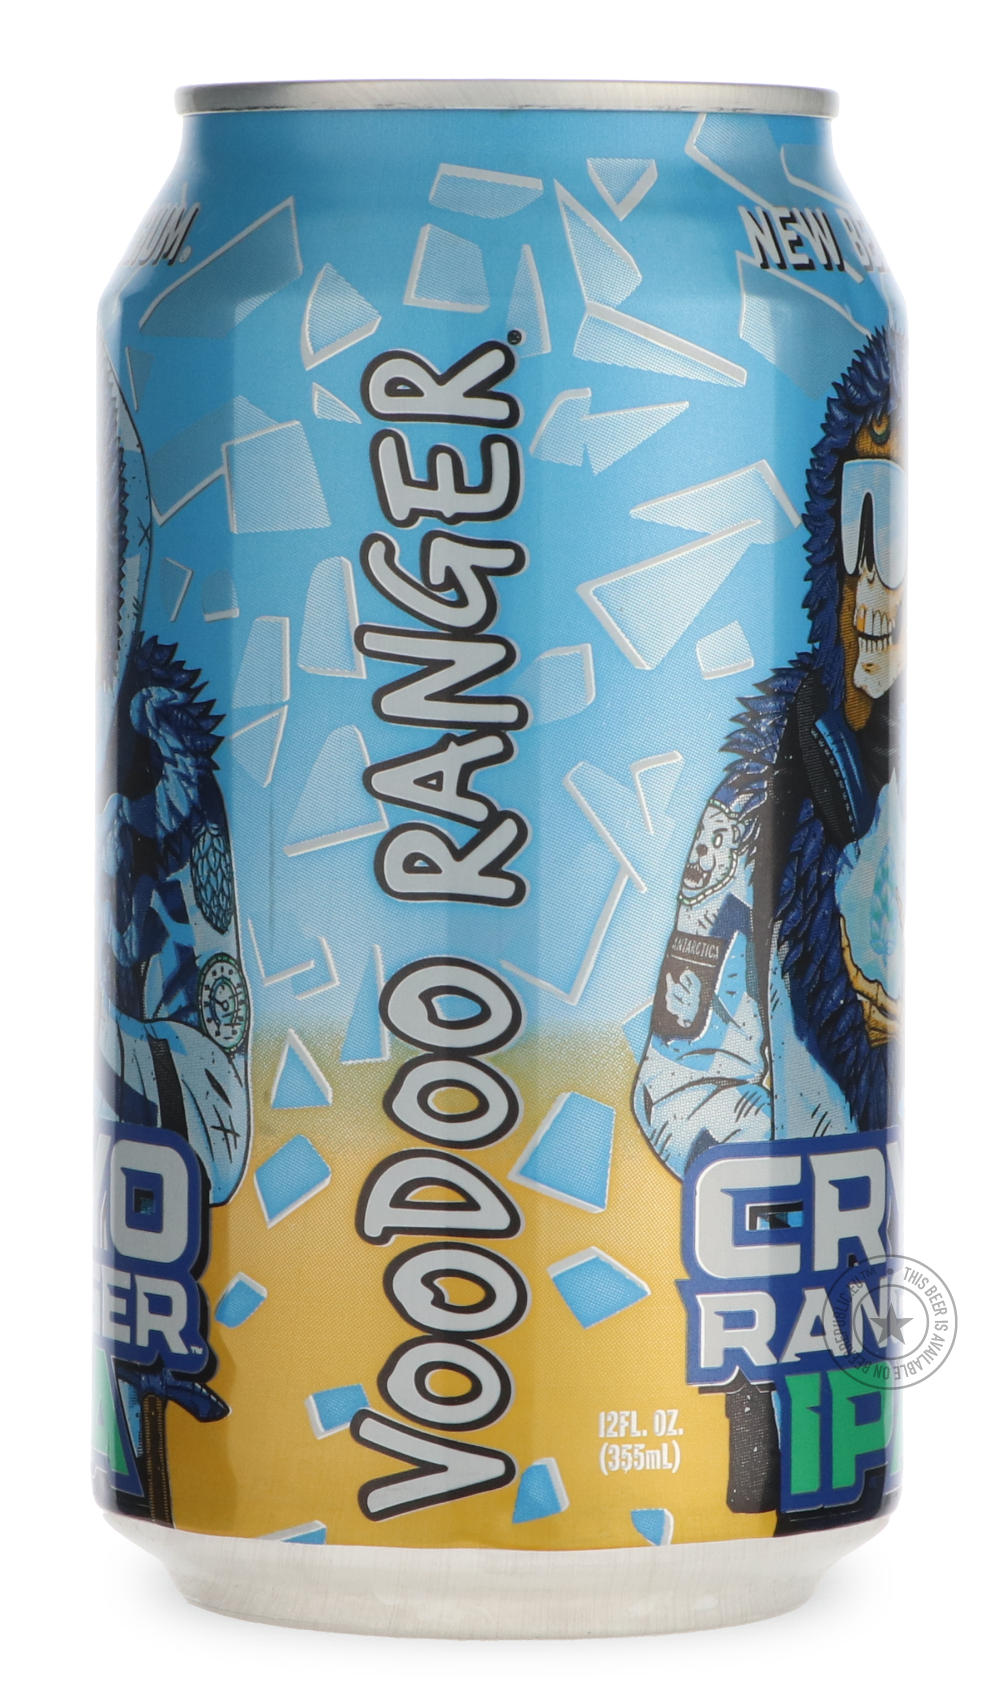 -New Belgium- Voodoo Ranger Cryo Ranger IPA-IPA- Only @ Beer Republic - The best online beer store for American & Canadian craft beer - Buy beer online from the USA and Canada - Bier online kopen - Amerikaans bier kopen - Craft beer store - Craft beer kopen - Amerikanisch bier kaufen - Bier online kaufen - Acheter biere online - IPA - Stout - Porter - New England IPA - Hazy IPA - Imperial Stout - Barrel Aged - Barrel Aged Imperial Stout - Brown - Dark beer - Blond - Blonde - Pilsner - Lager - Wheat - Weizen